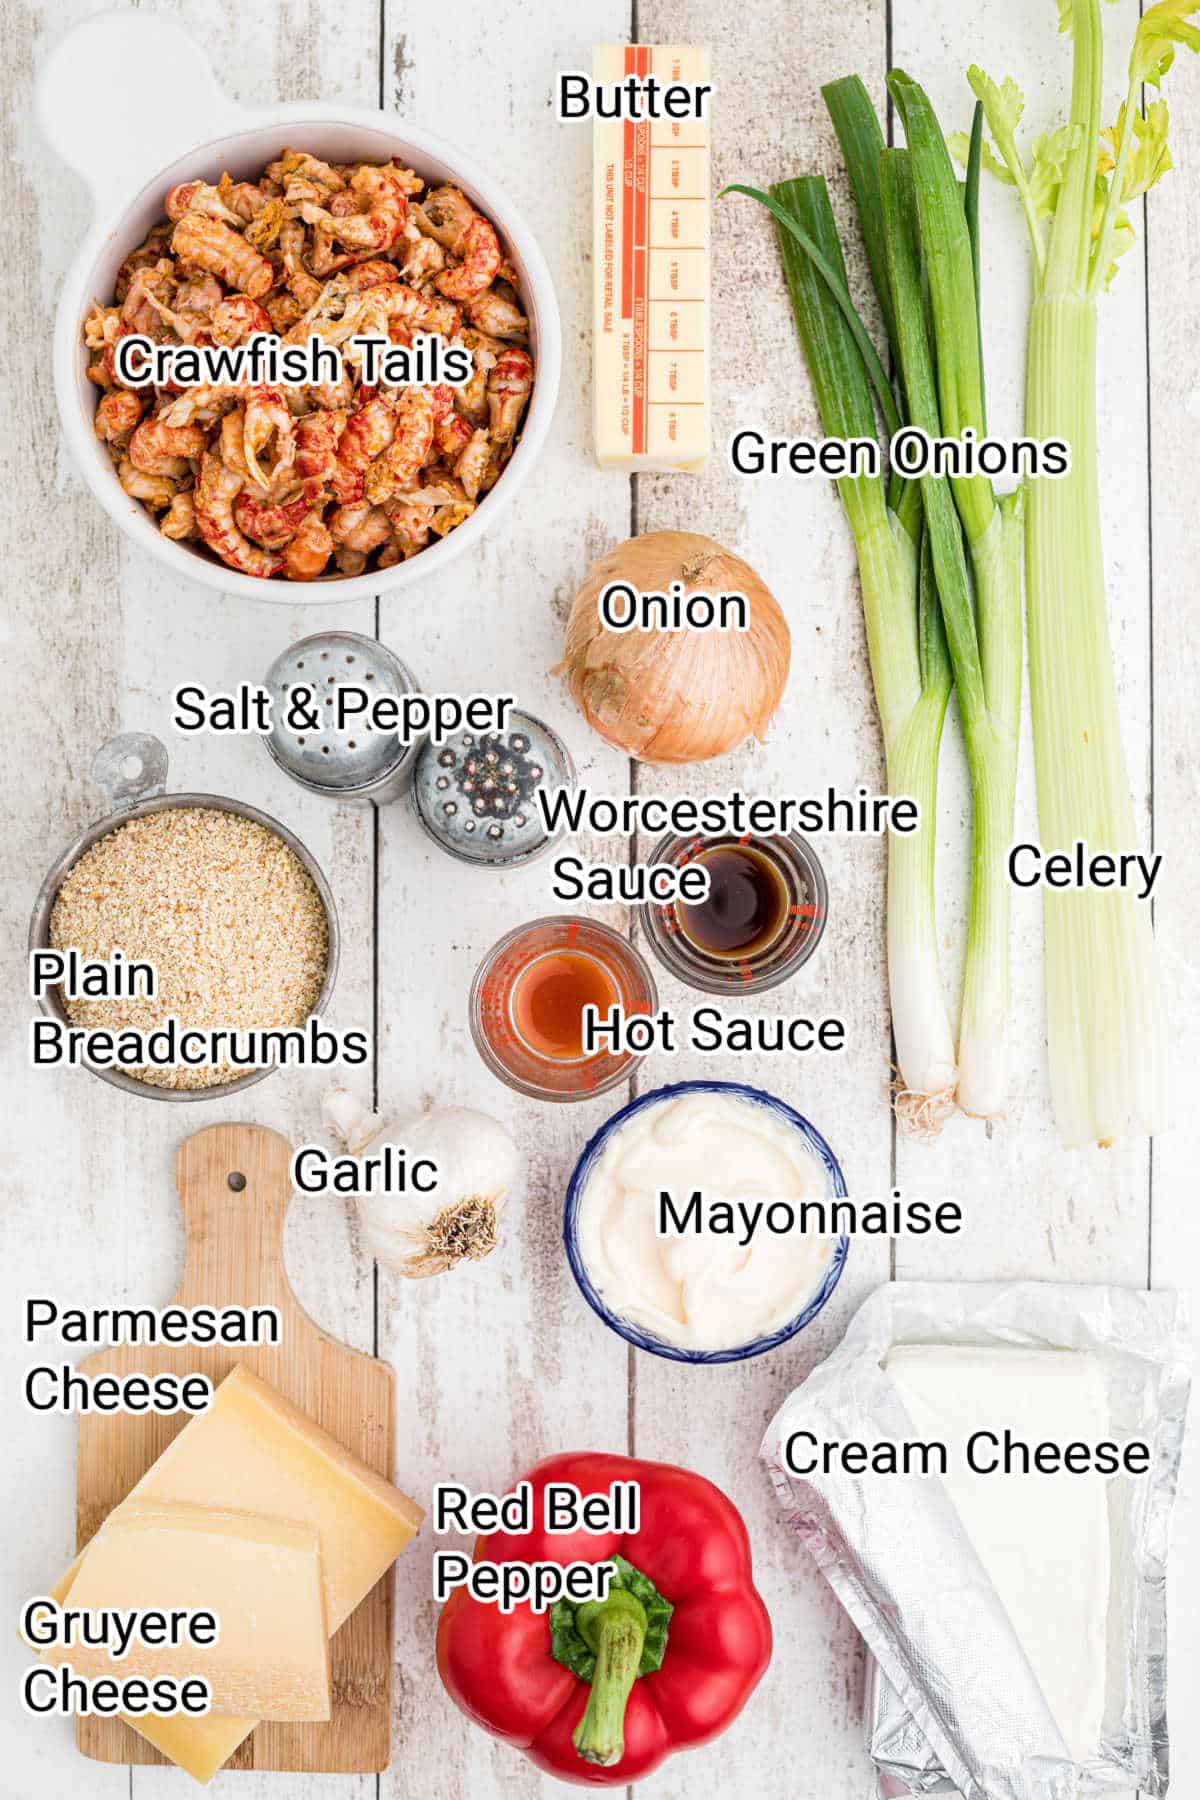 ingredients laid out showing what is needed for a crawfish dip